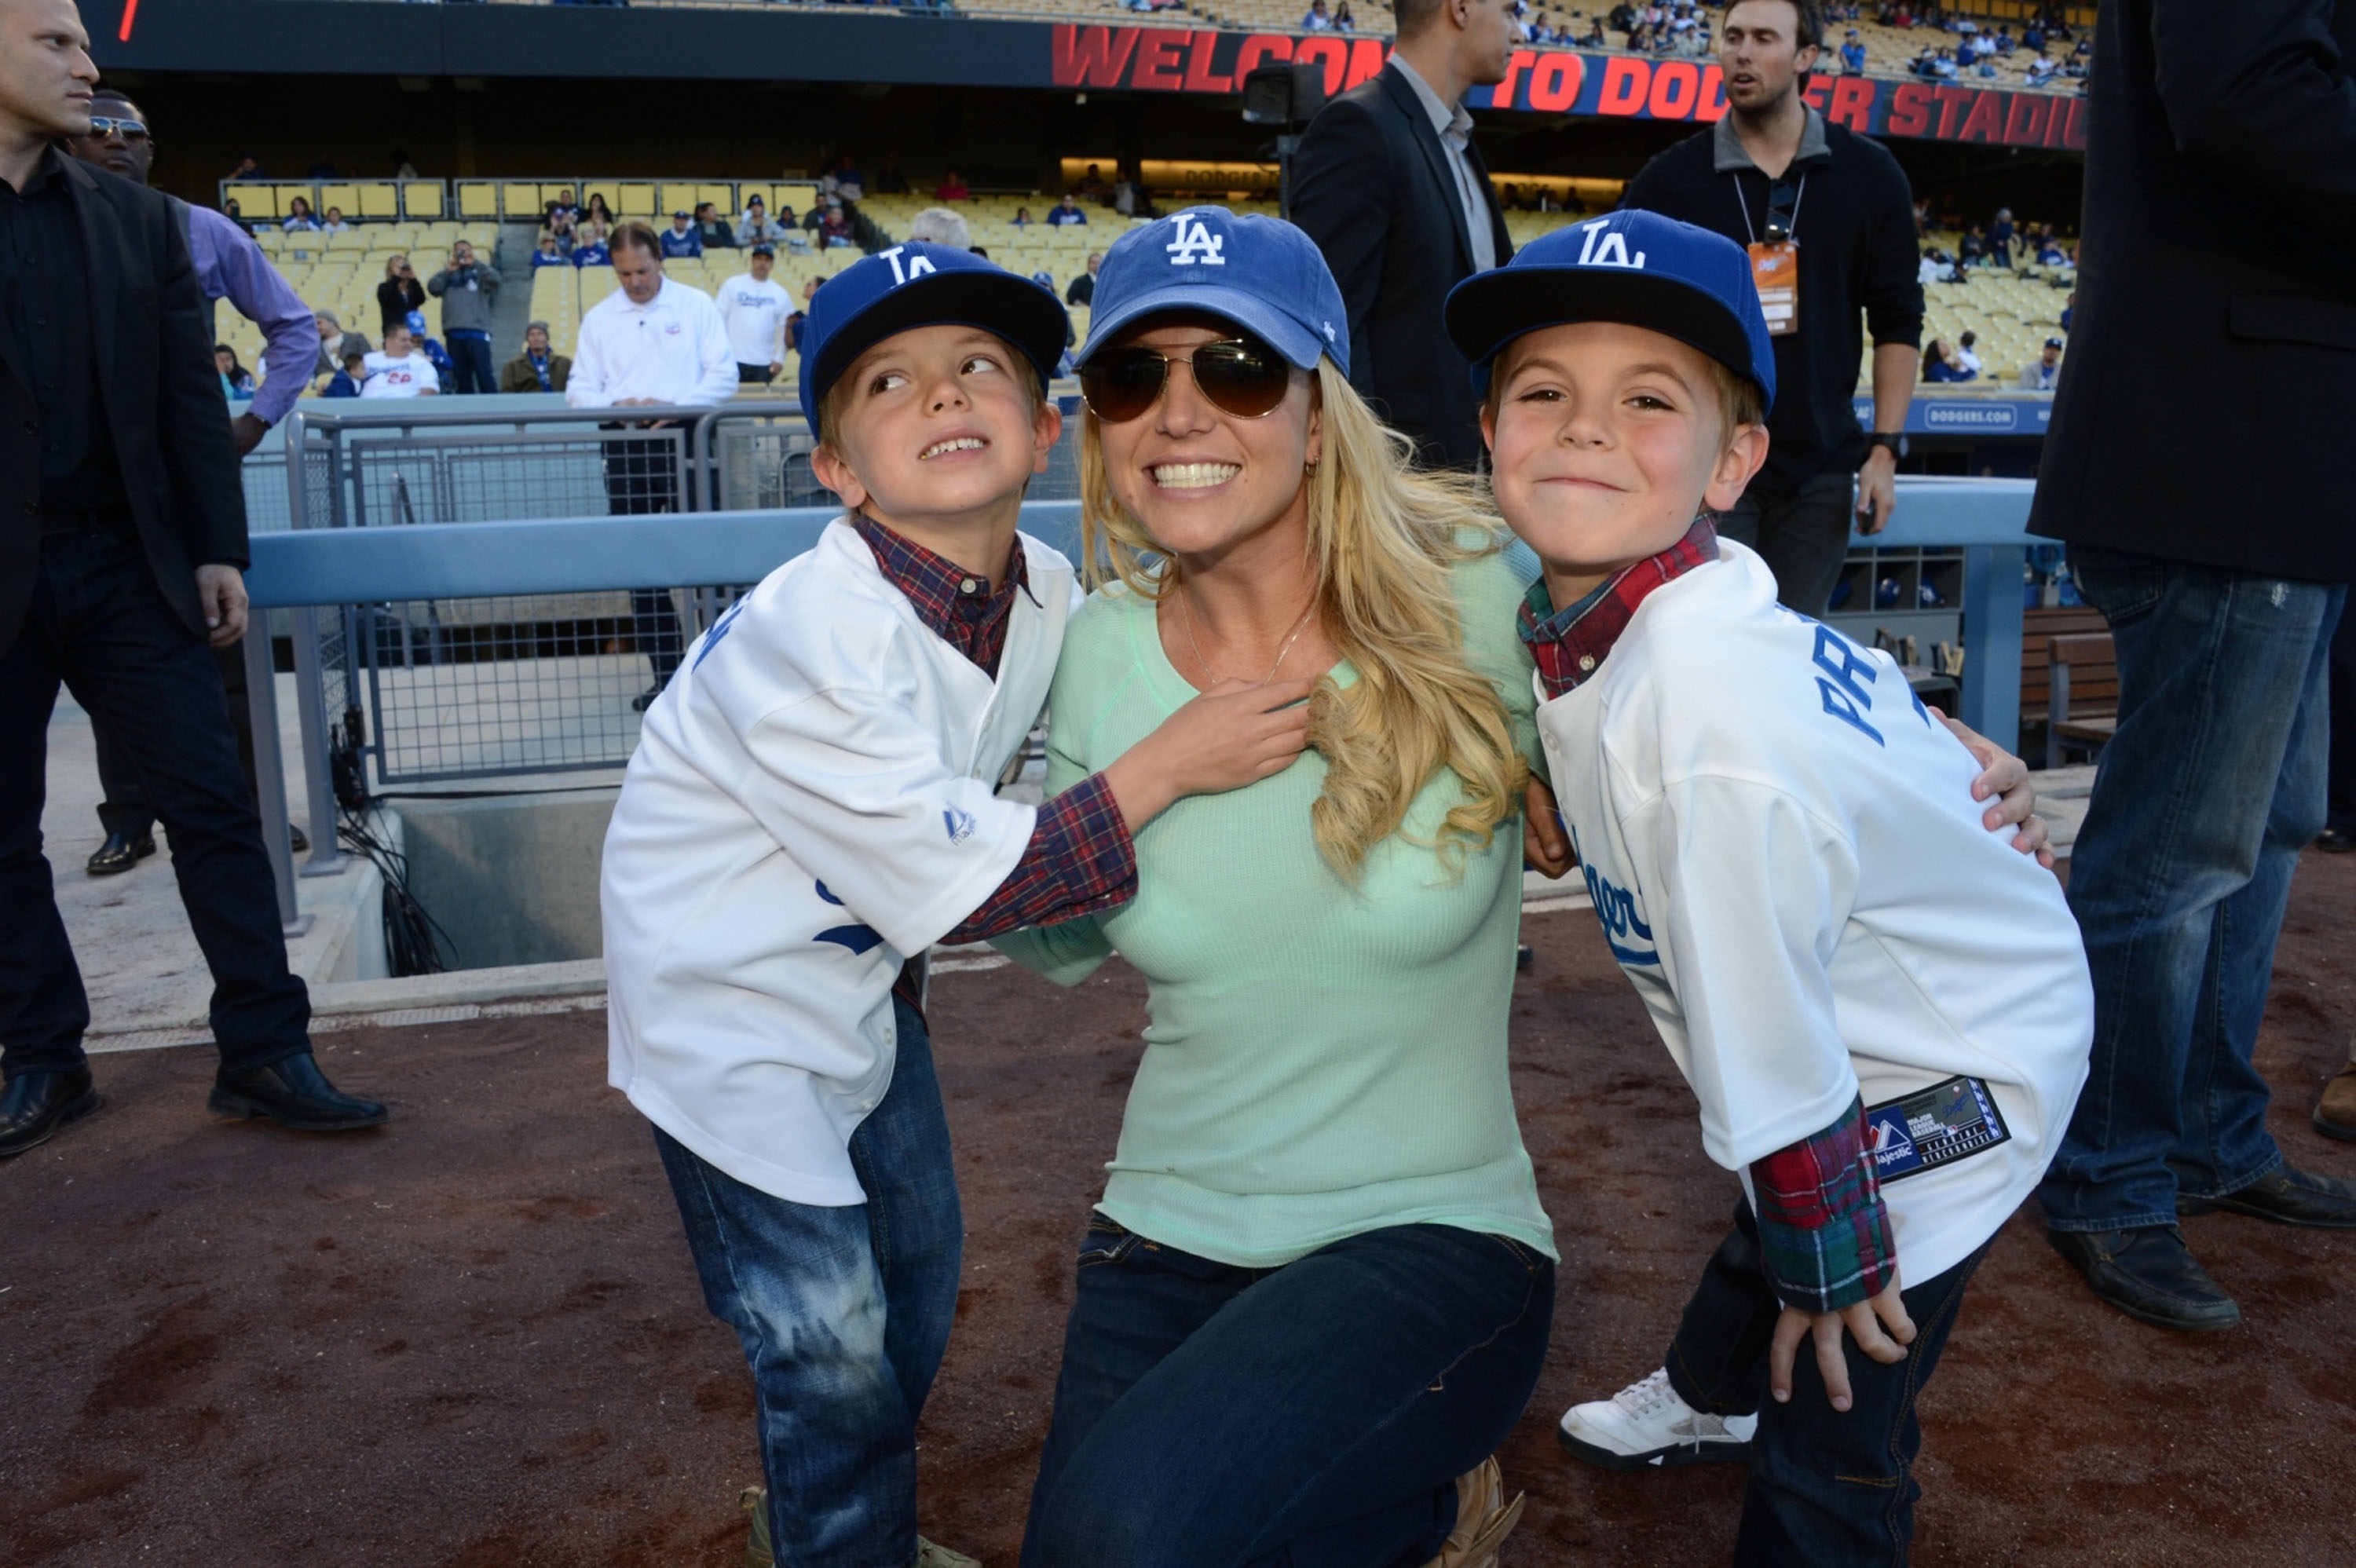 Does Britney Spears see her kids? Pictured here is Britney Spears with Britney kids: Jayden Federline and Sean Preston Federline